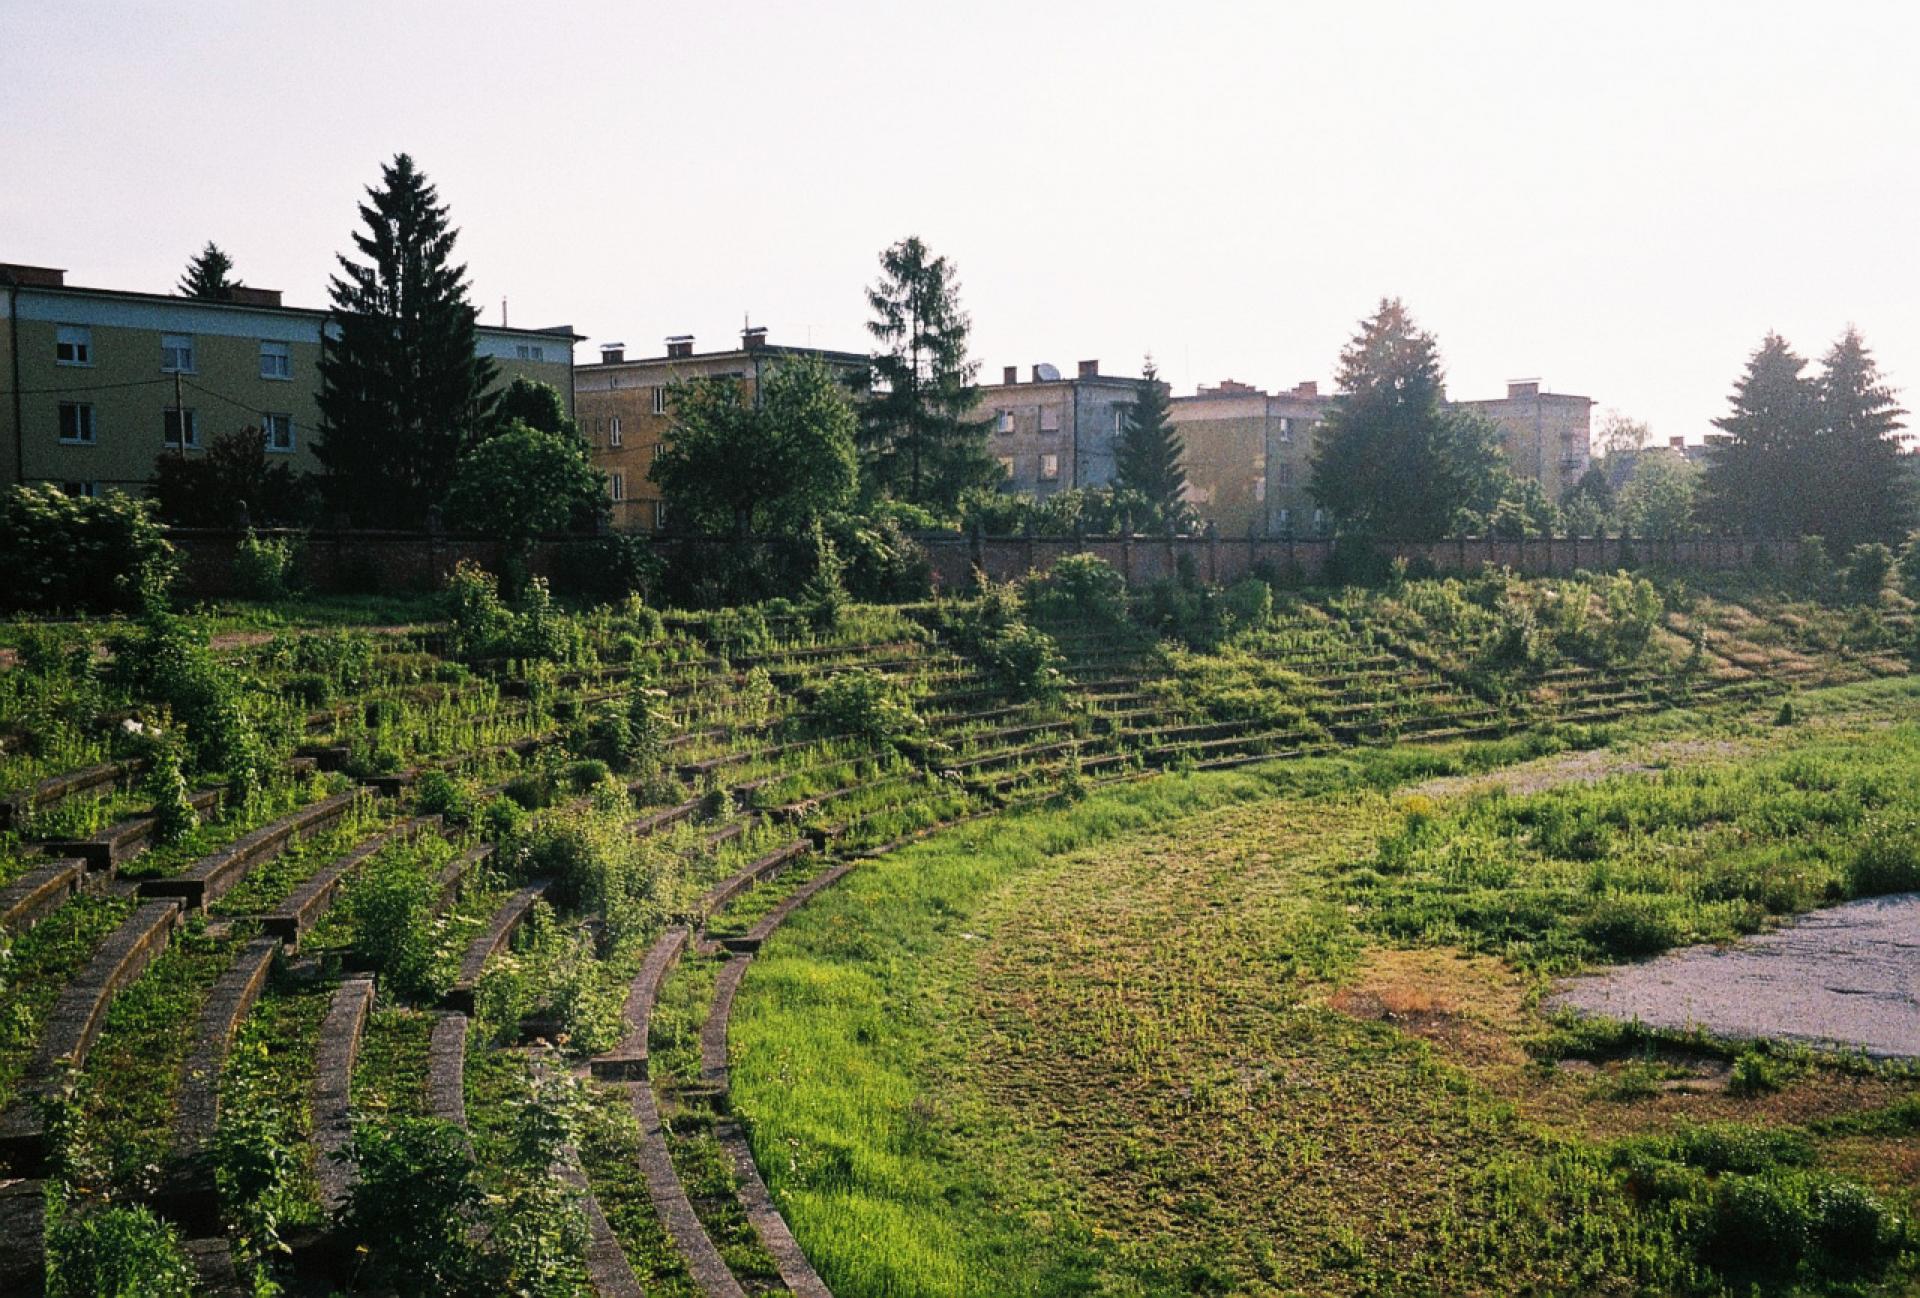 The stadium in the 1950s and today, overgrown by vegetation. | Photo © Edi Šelhaus, Failed architecture